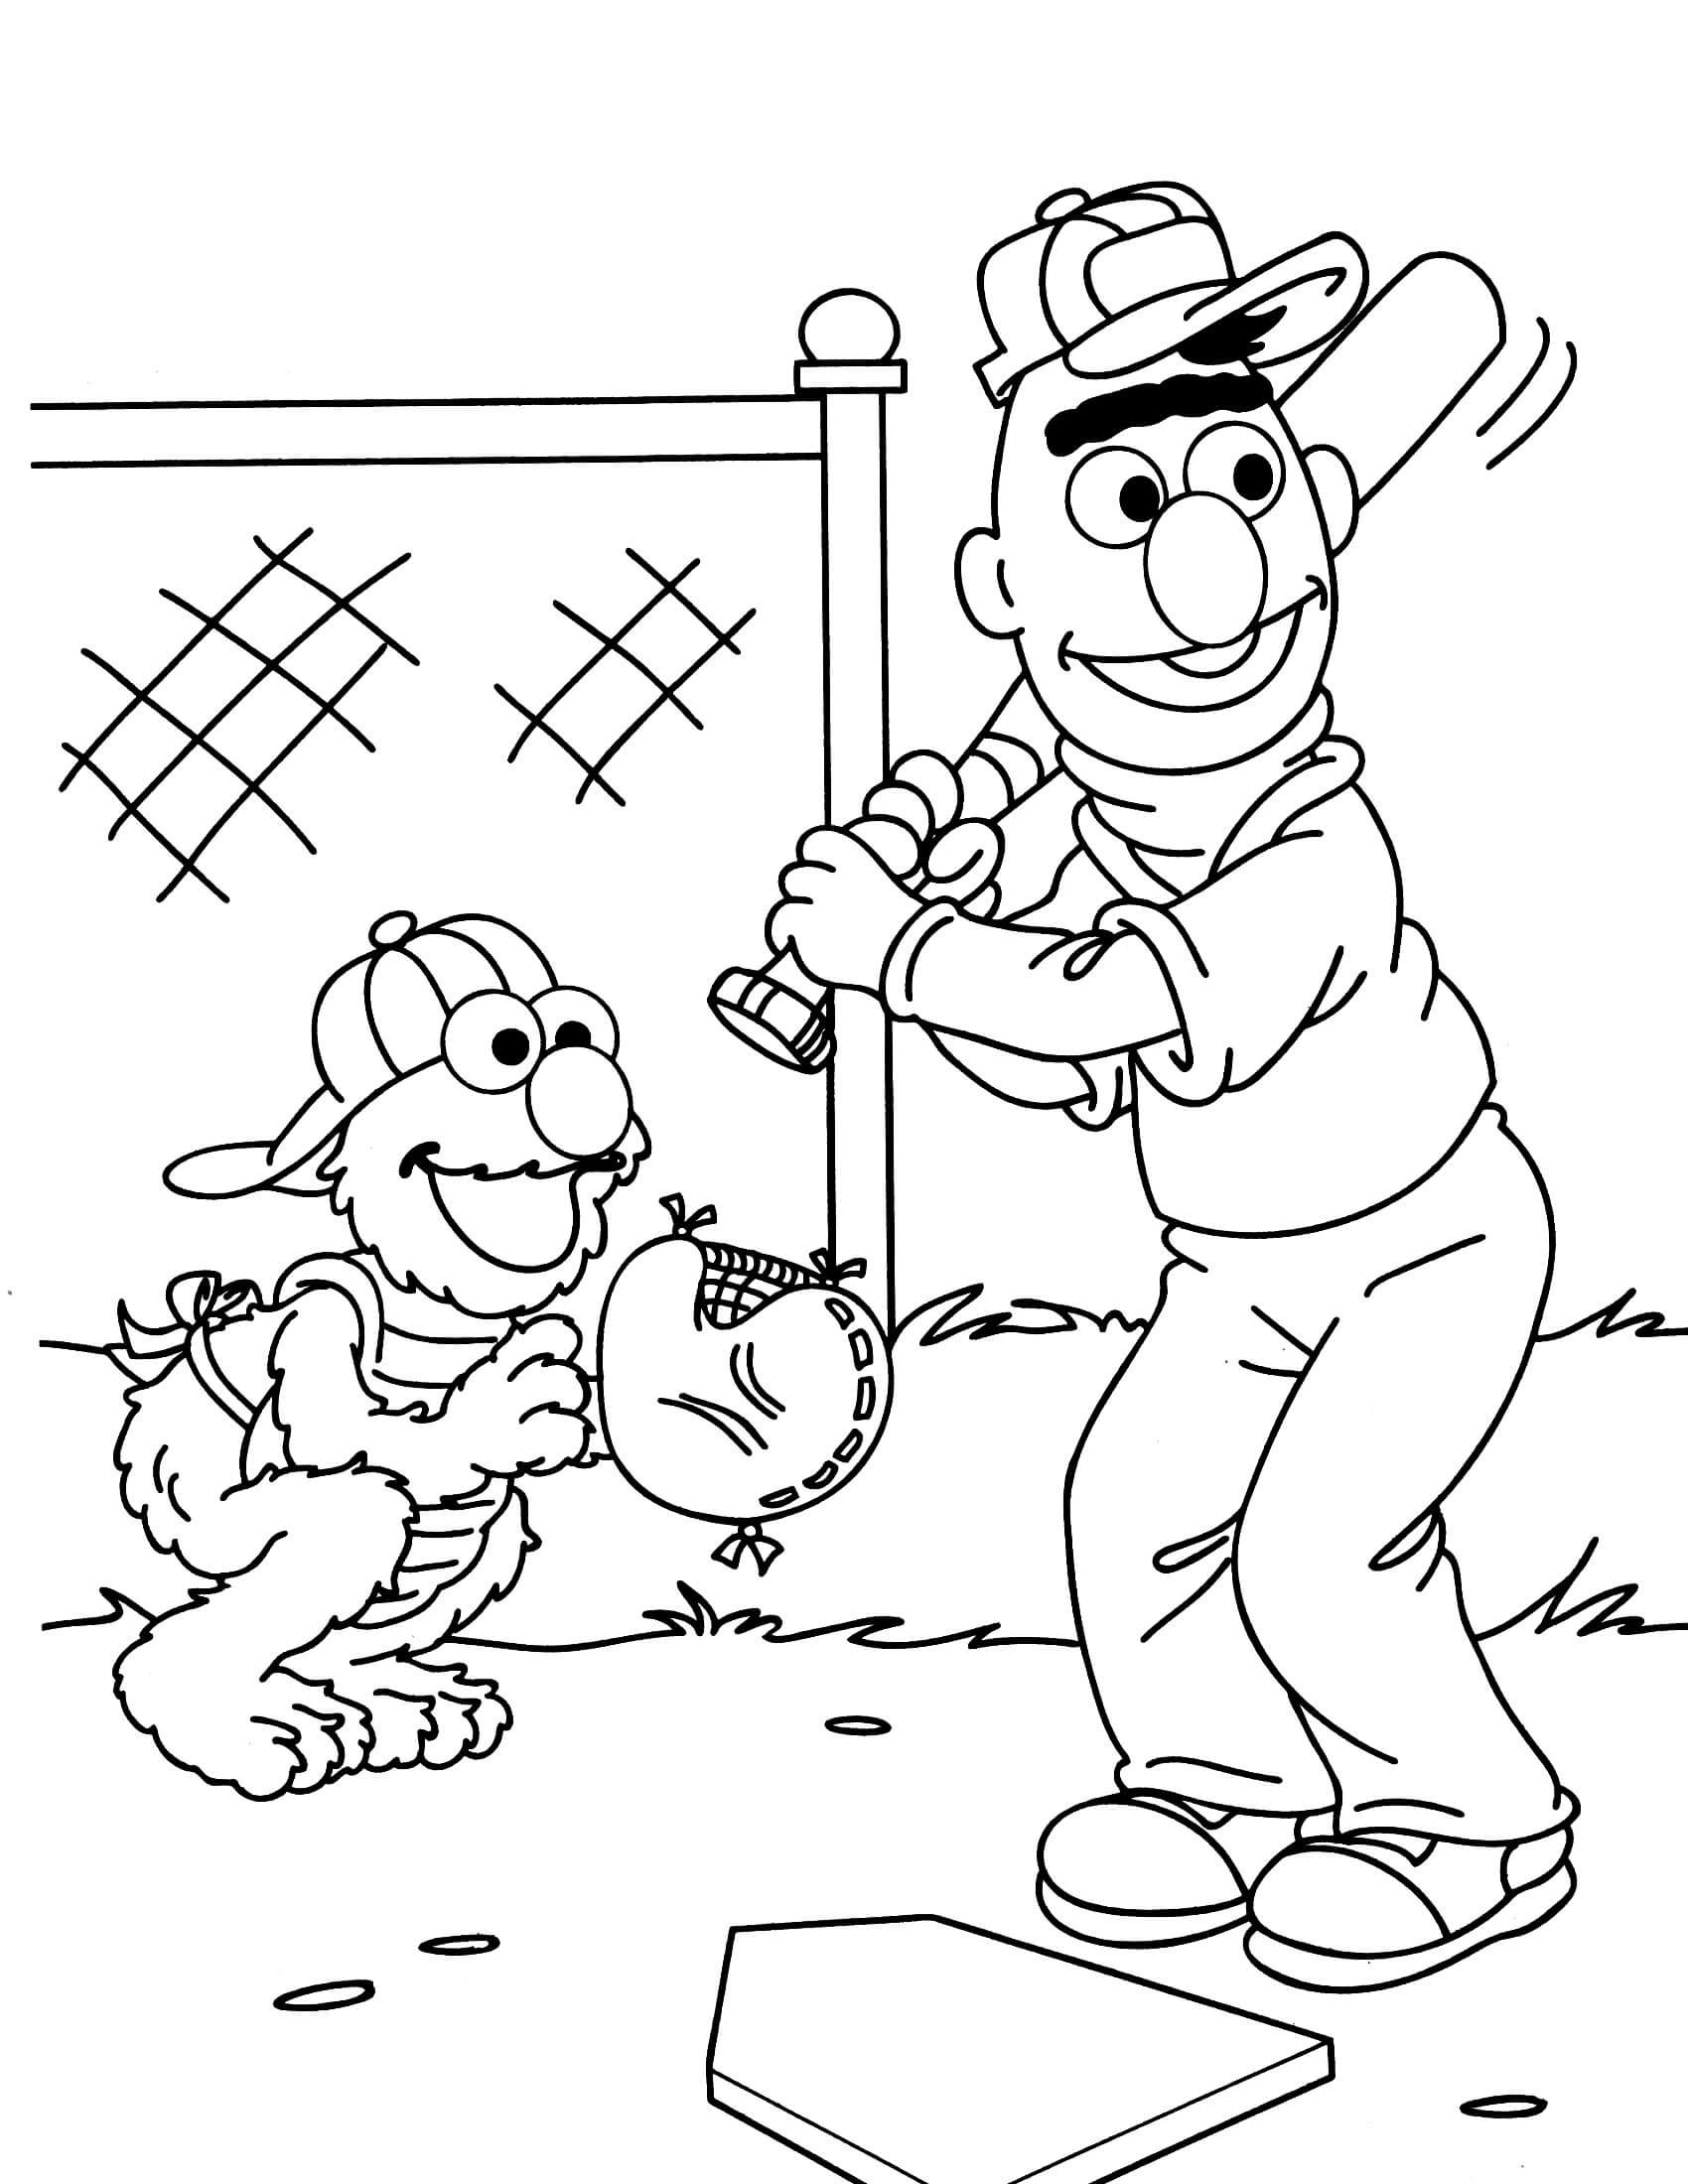 Baseball Sesame Street Coloring Pages